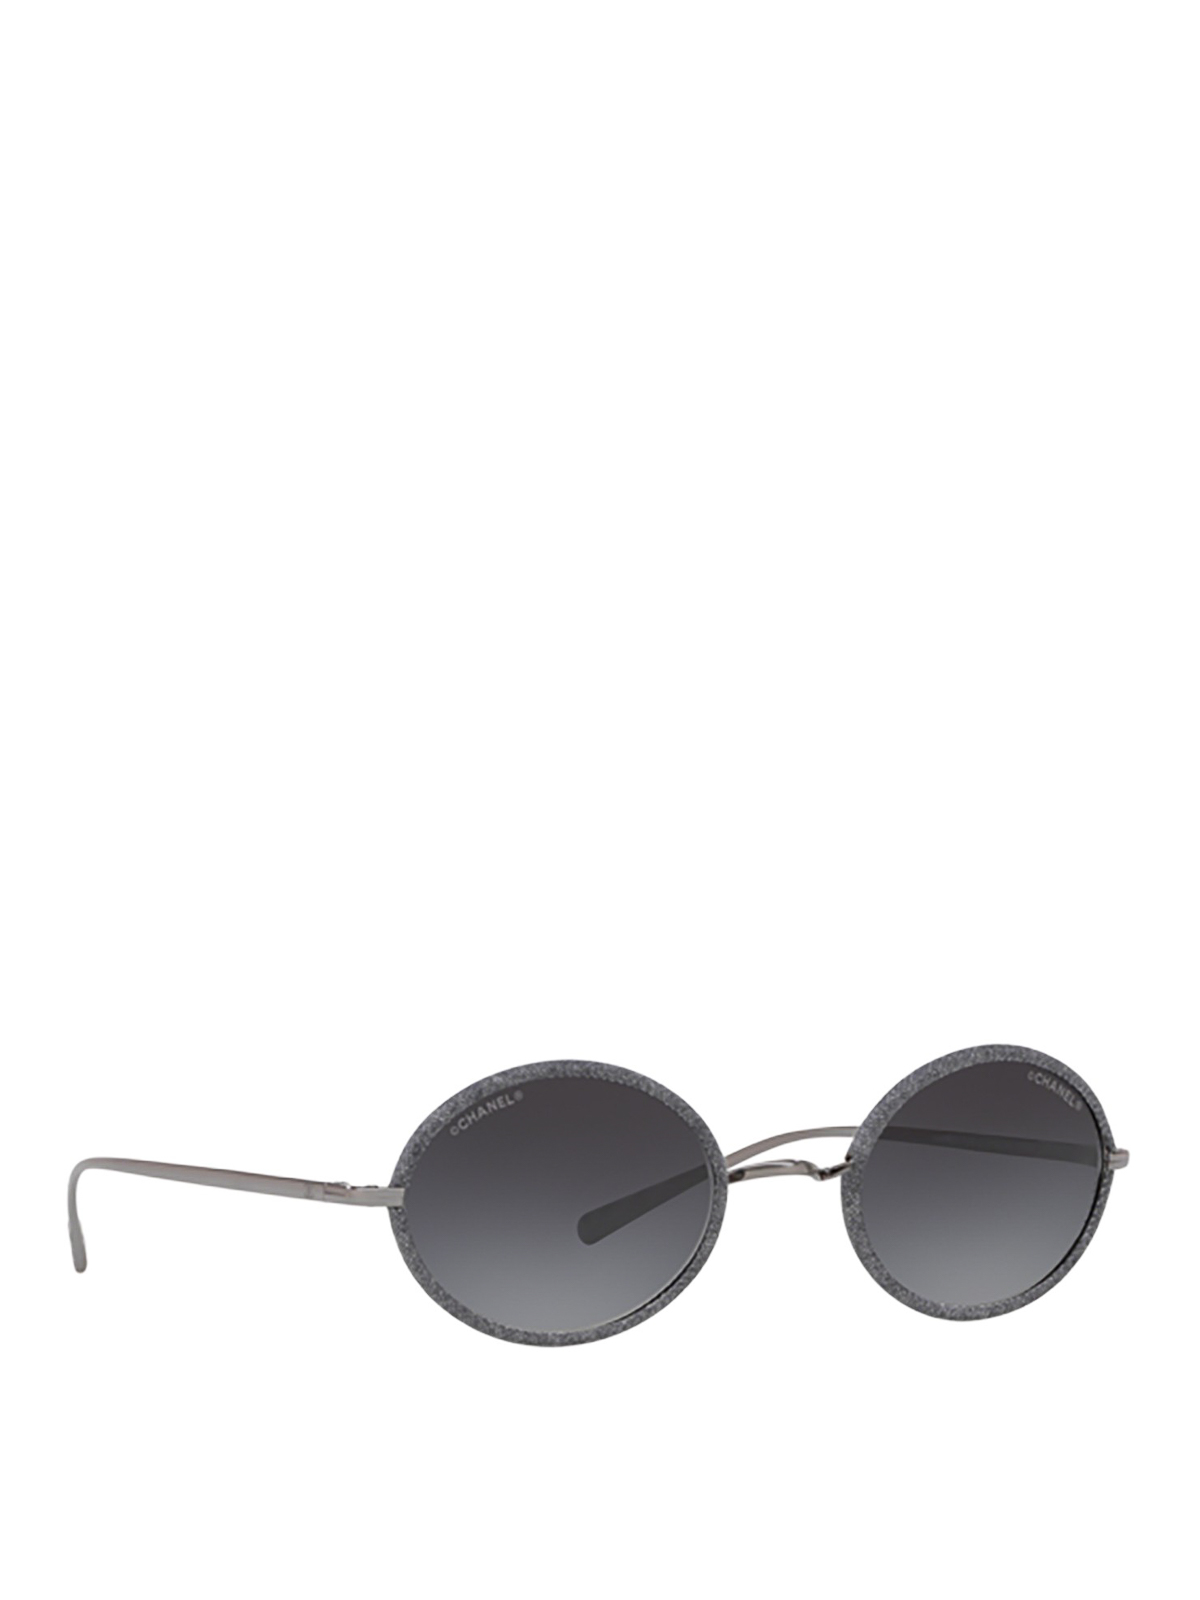 Sunglasses Chanel - Metal and denim rounded sunglasses - CH4248JC108S6